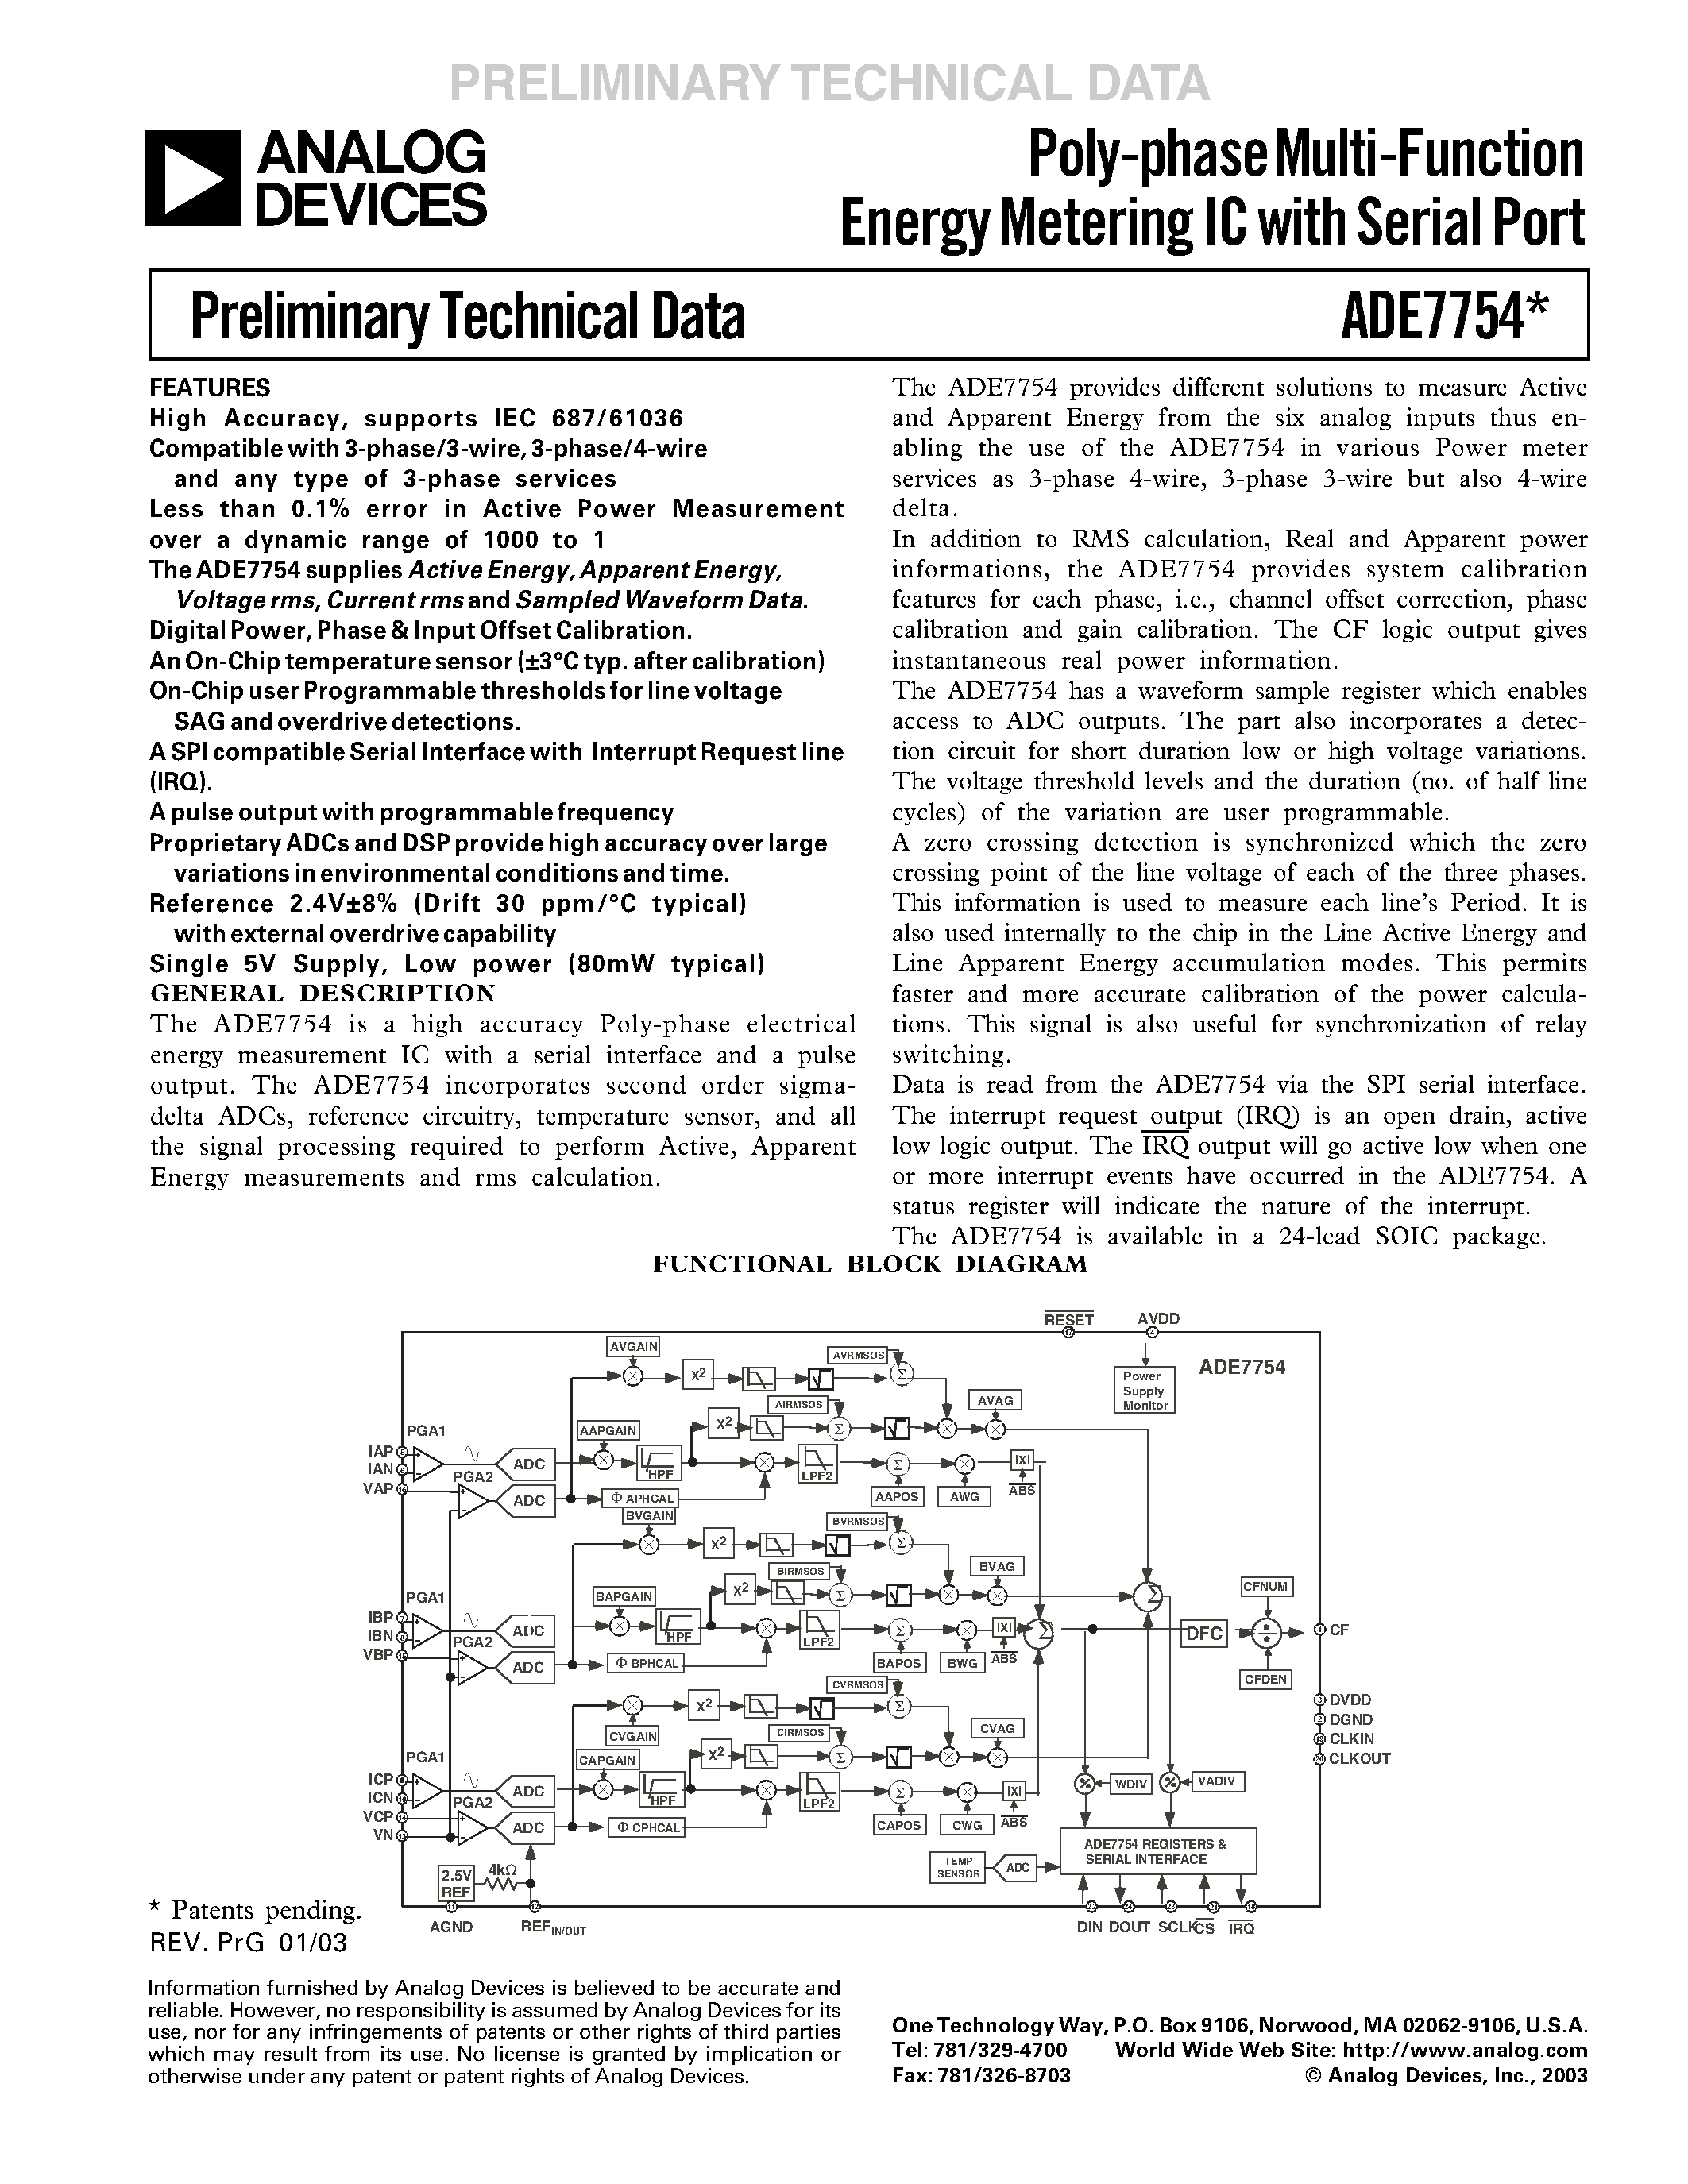 Datasheet ADE7754 - Poly-phase Multi-Function Energy Metering IC with Serial Port page 1